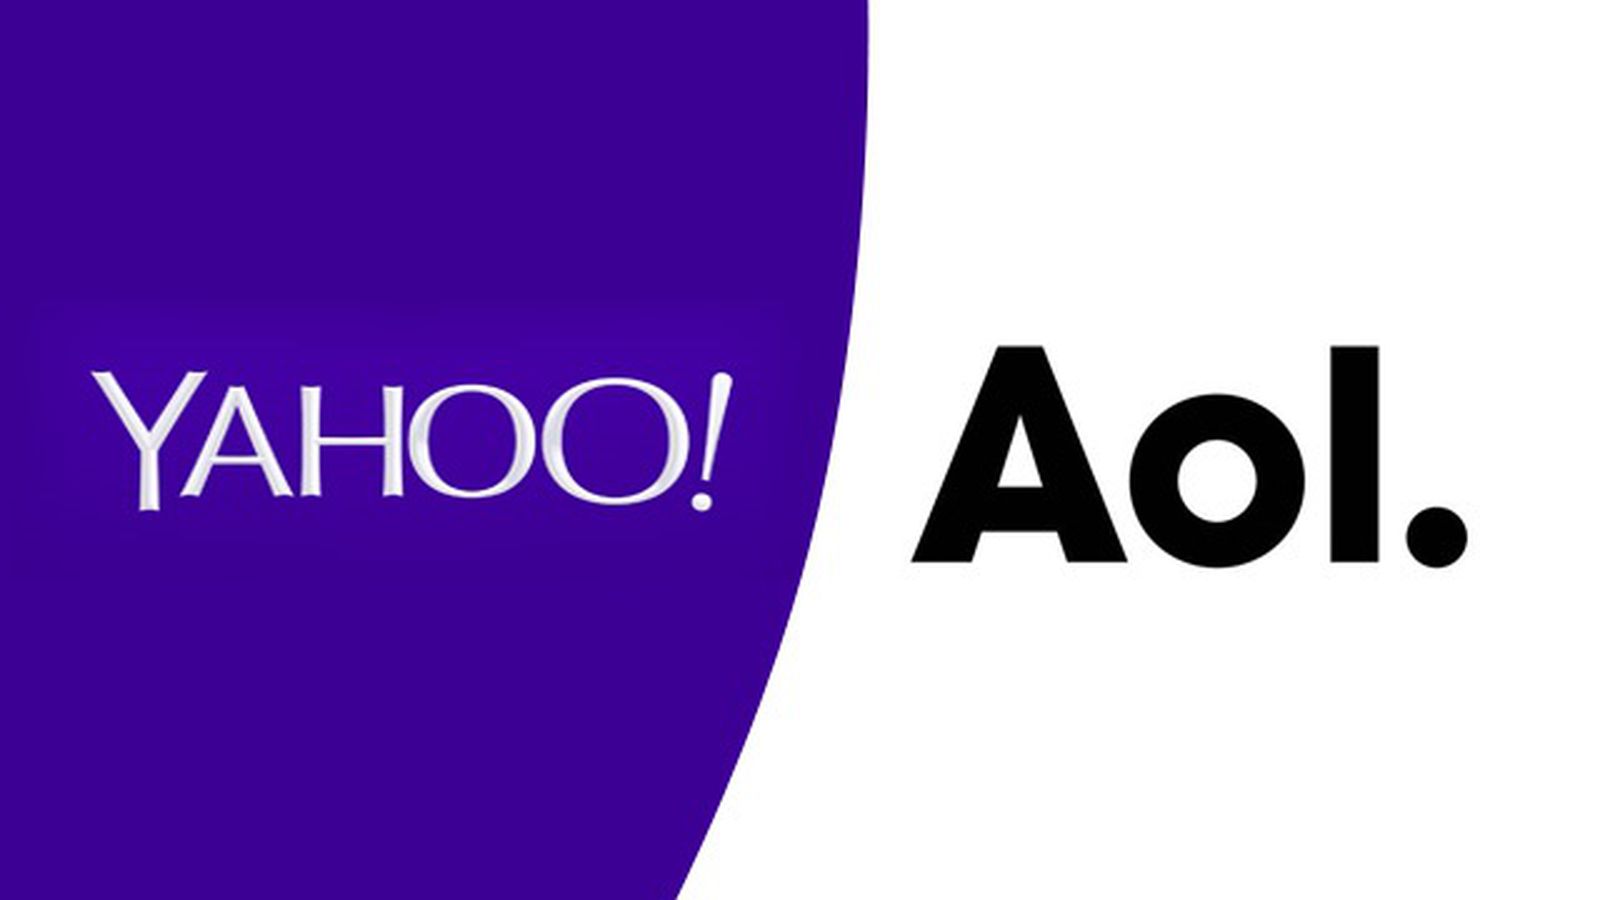 As expected, Verizon says it will buy Yahoo for $4.83 ...